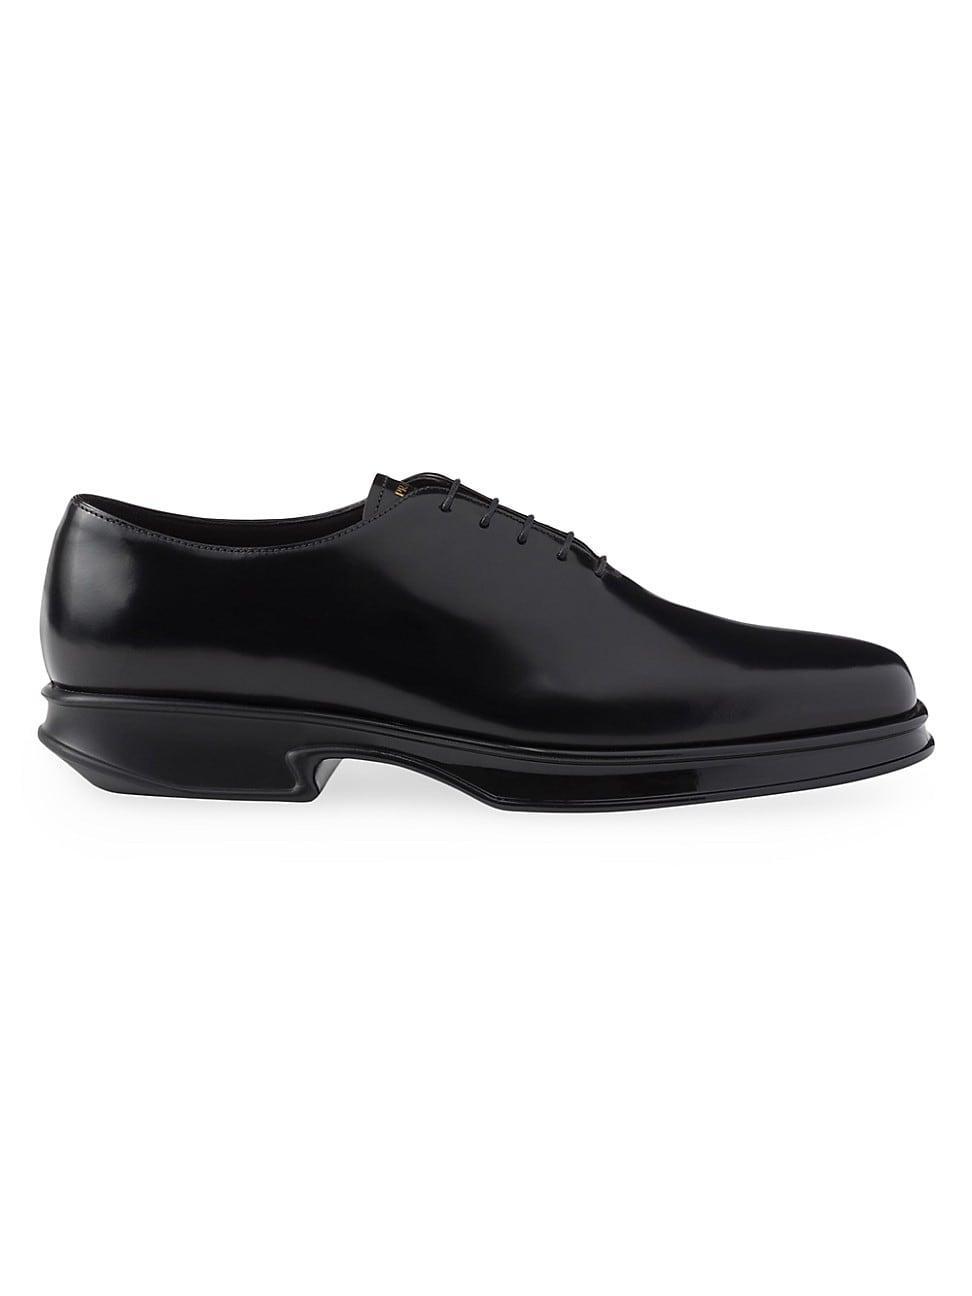 Mens Brushed Leather Lace-Up Shoes Product Image